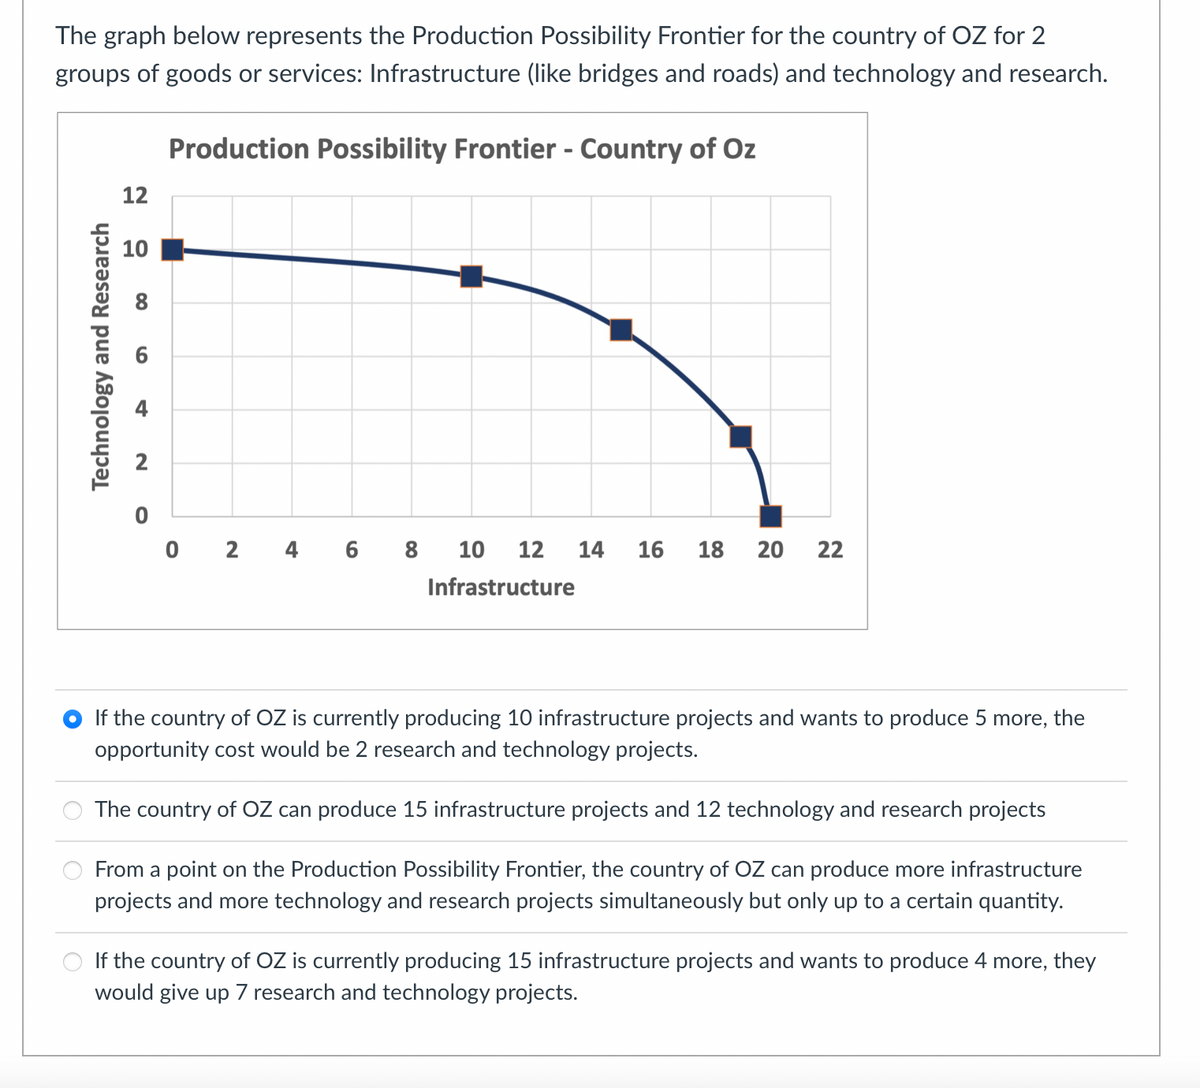 The graph below represents the Production Possibility Frontier for the country of OZ for 2
groups of goods or services: Infrastructure (like bridges and roads) and technology and research.
Production Possibility Frontier - Country of Oz
12
10
6
O 2 4 6 8
10 12
14
16
18
22
Infrastructure
If the country of OZ is currently producing 10 infrastructure projects and wants to produce 5 more, the
opportunity cost would be 2 research and technology projects.
The country of OZ can produce 15 infrastructure projects and 12 technology and research projects
From a point on the Production Possibility Frontier, the country of OZ can produce more infrastructure
projects and more technology and research projects simultaneously but only up to a certain quantity.
O If the country of OZ is currently producing 15 infrastructure projects and wants to produce 4 more, they
would give up 7 research and technology projects.
Technology and Research
20
